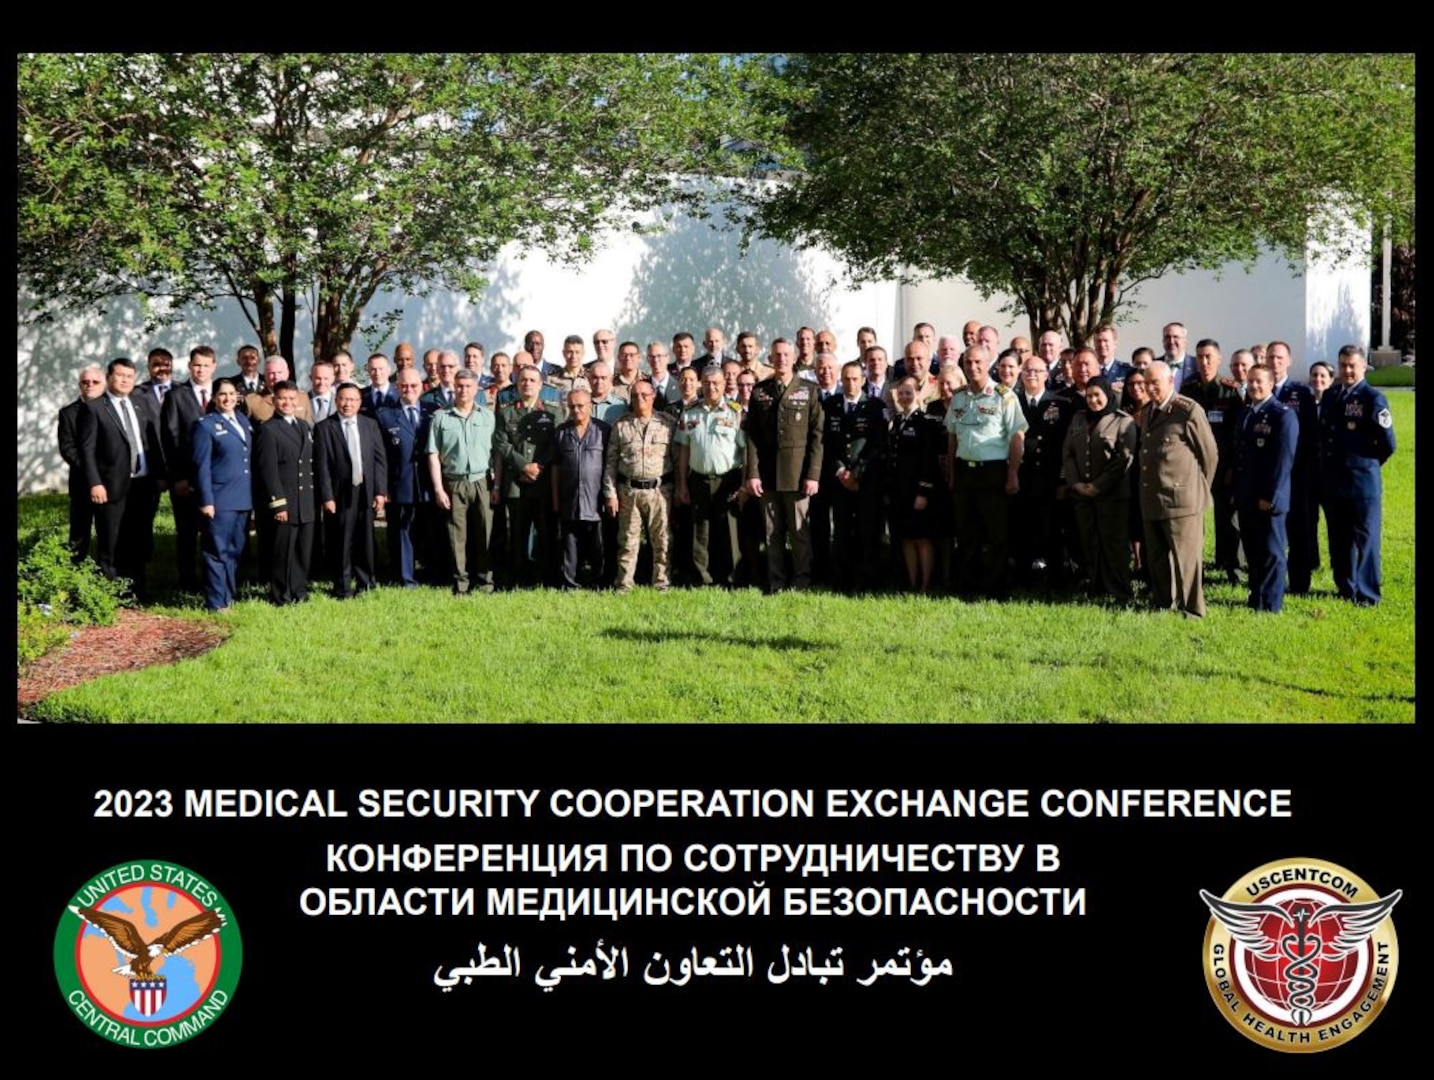 Photo of U.S. Central Command’s 2023 Medical Security Cooperation Exchange (MSCE). The MSCE brings together medical professionals from the U.S. and partner nations to share best practices and strengthen relationships. (U.S. Central Command Public Affairs photo by Tom Gagnier)